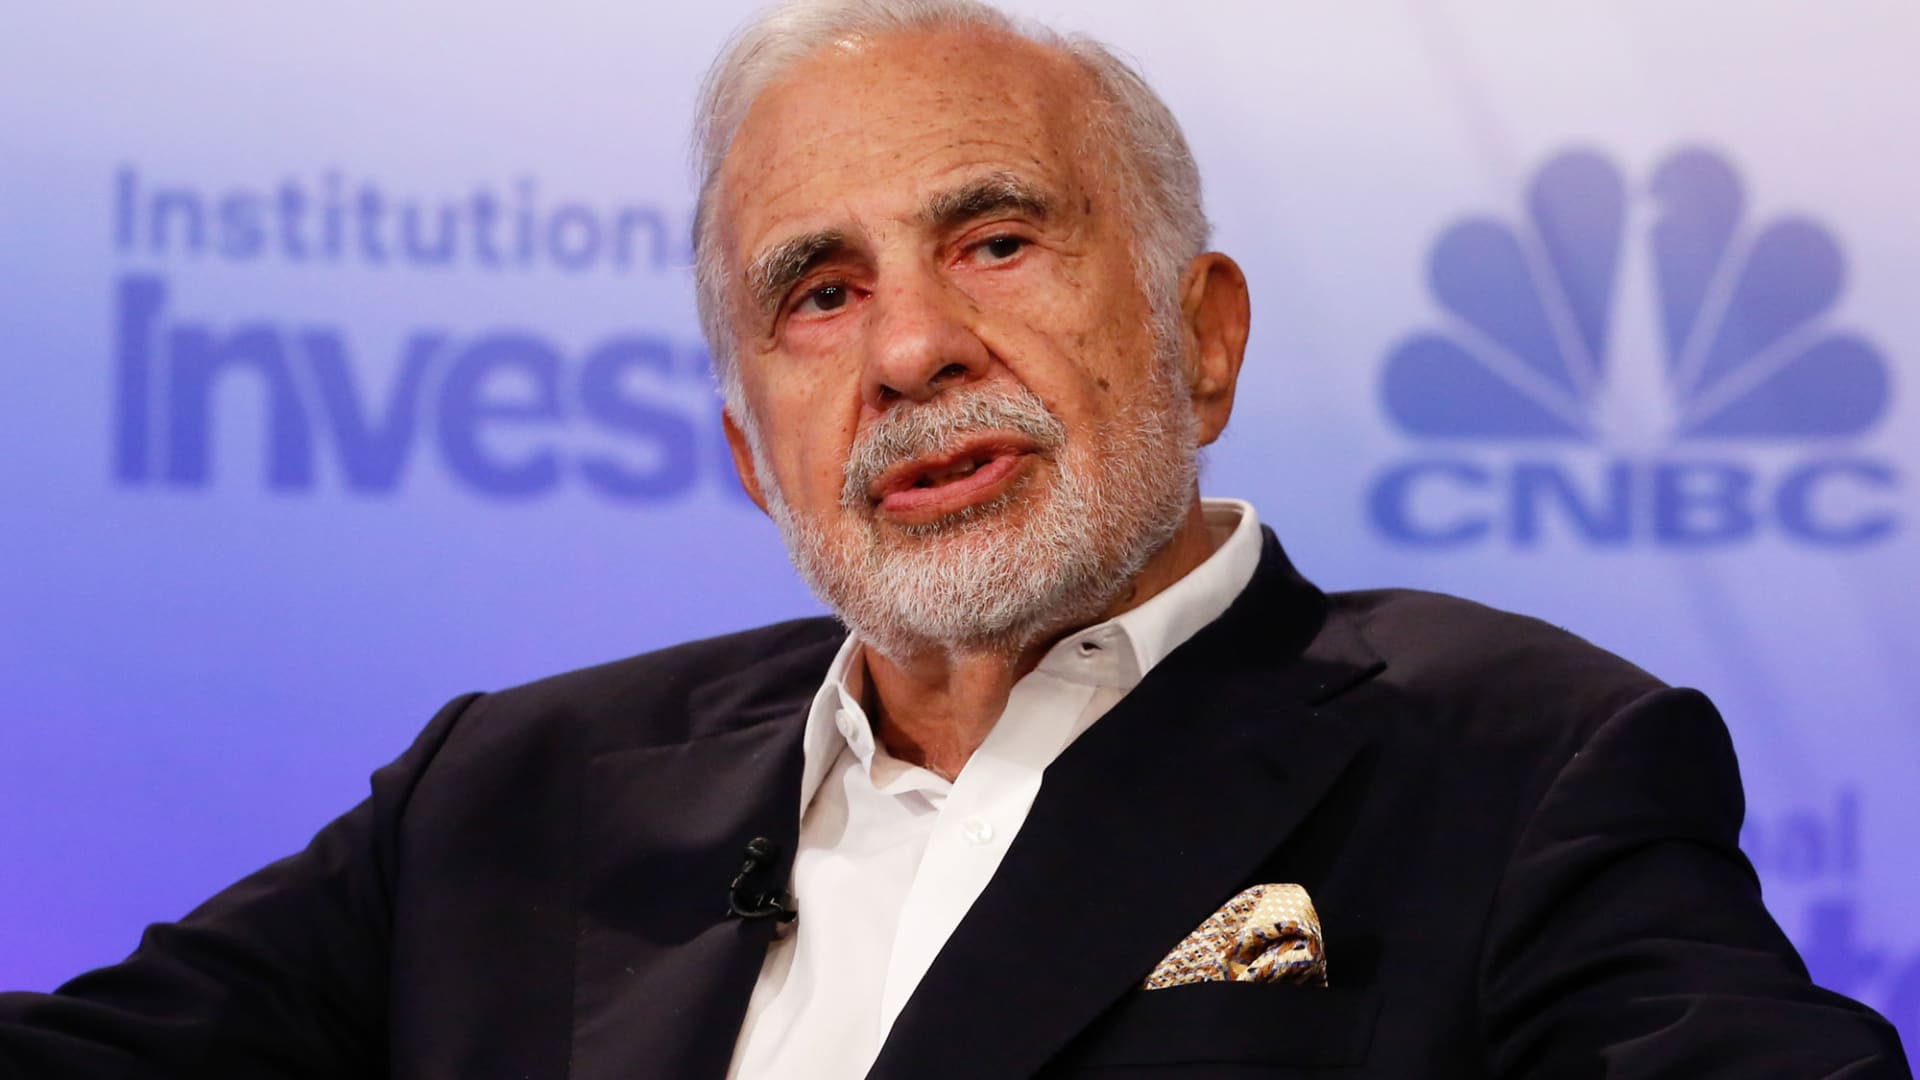 Carl Icahn loses proxy fight with McDonald’s over animal welfare